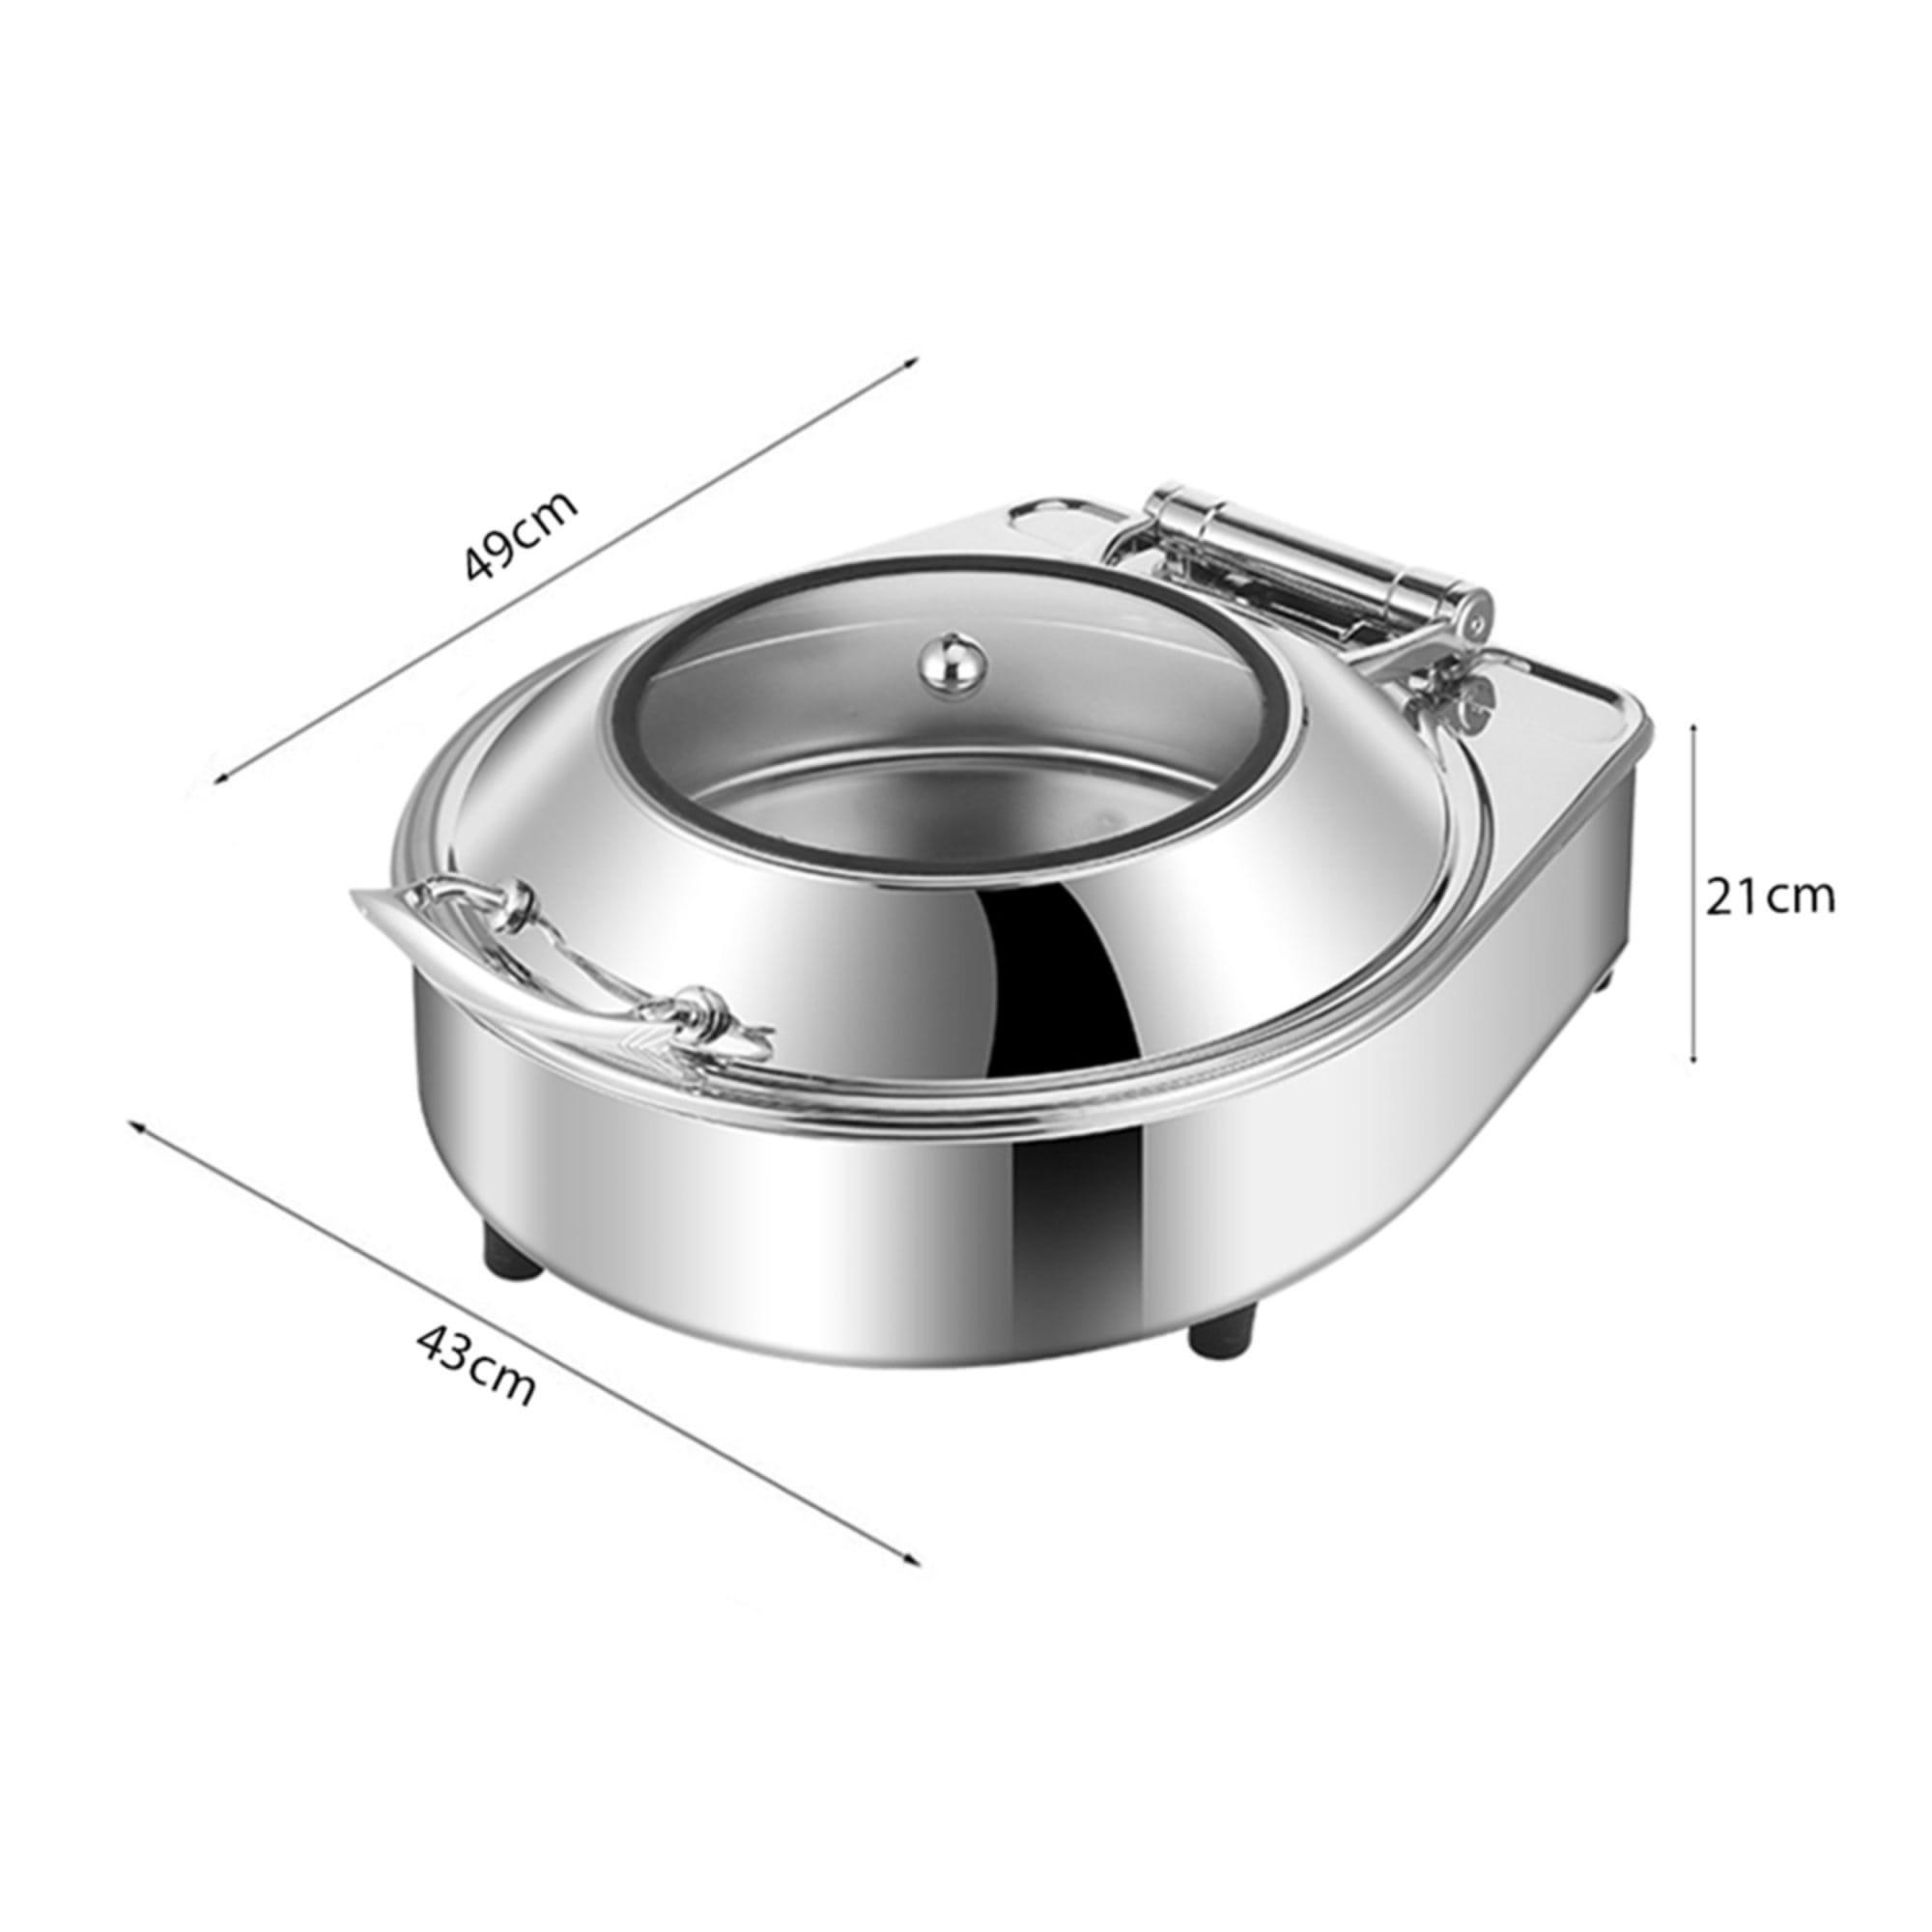 Soga Round Stainless Steel Chafing Dish with Top Lid Set of 2 Image 5